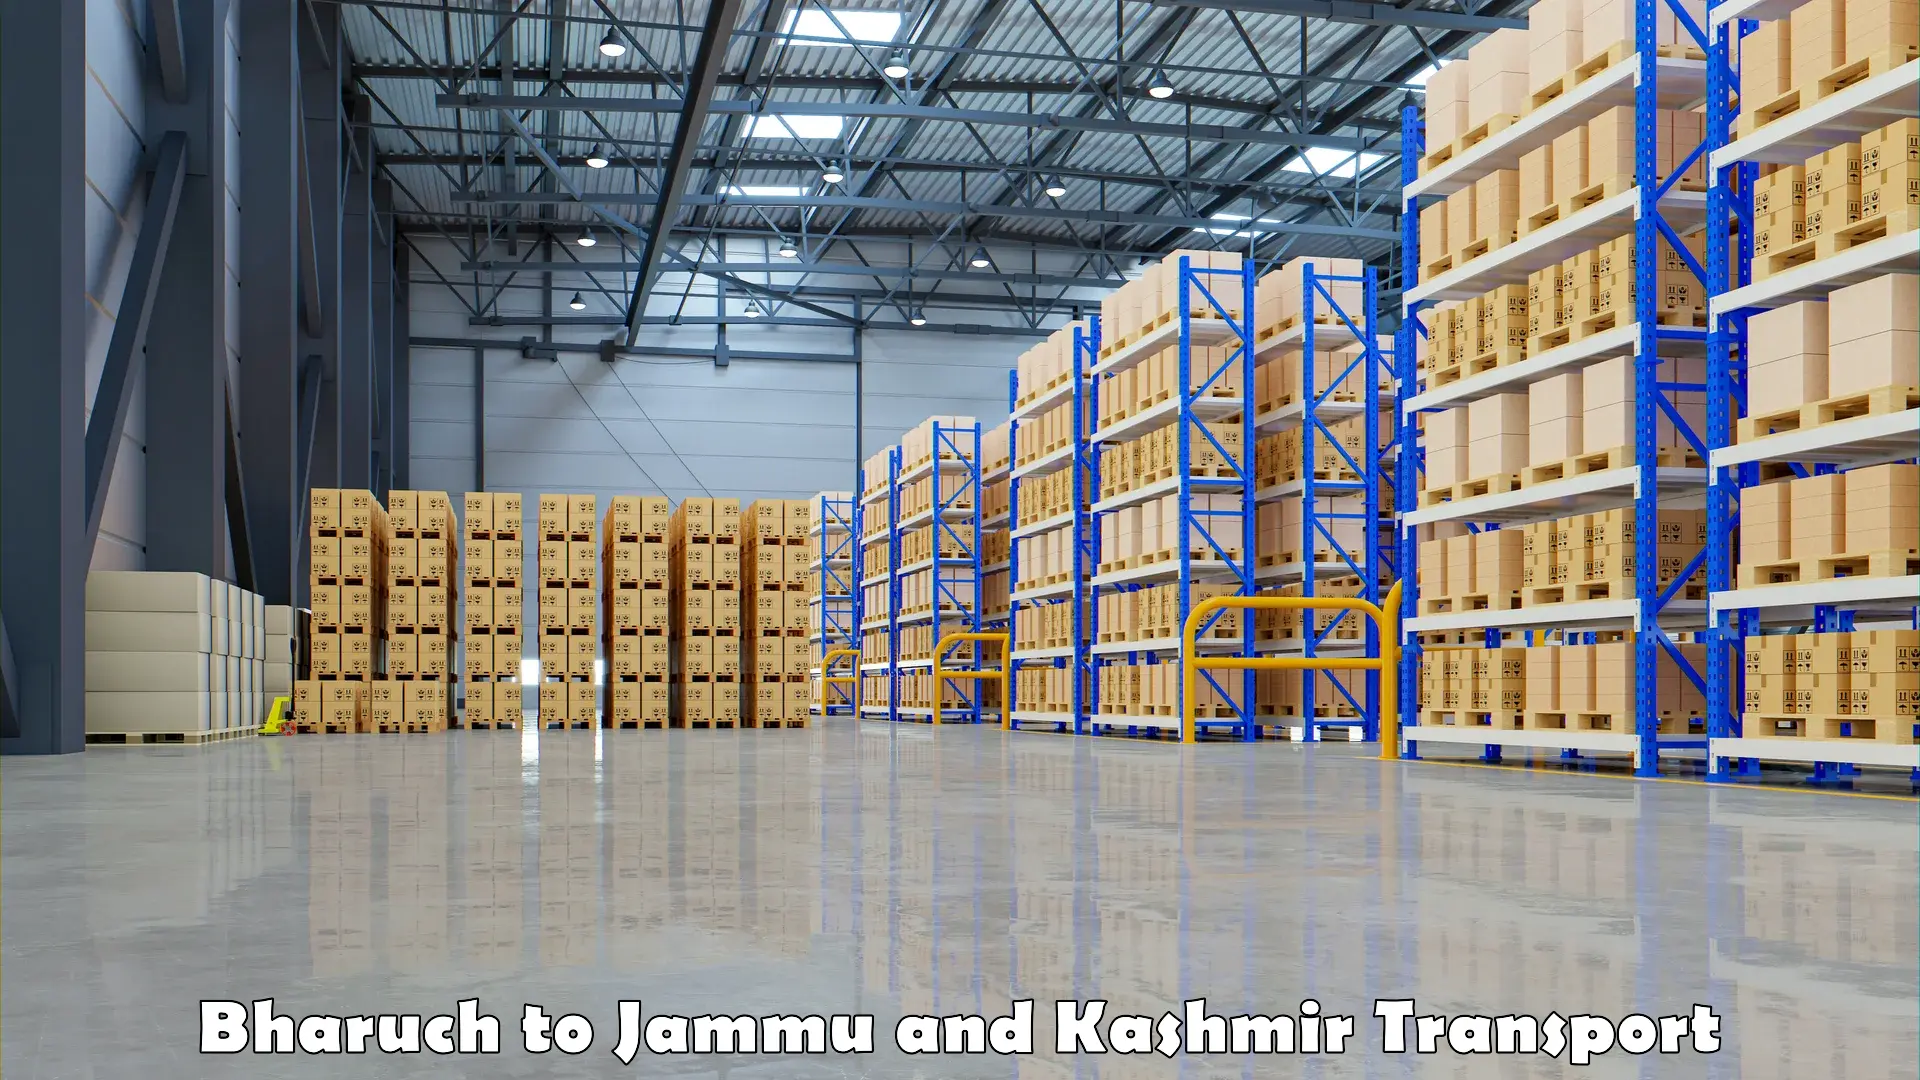 Container transport service Bharuch to Jammu and Kashmir